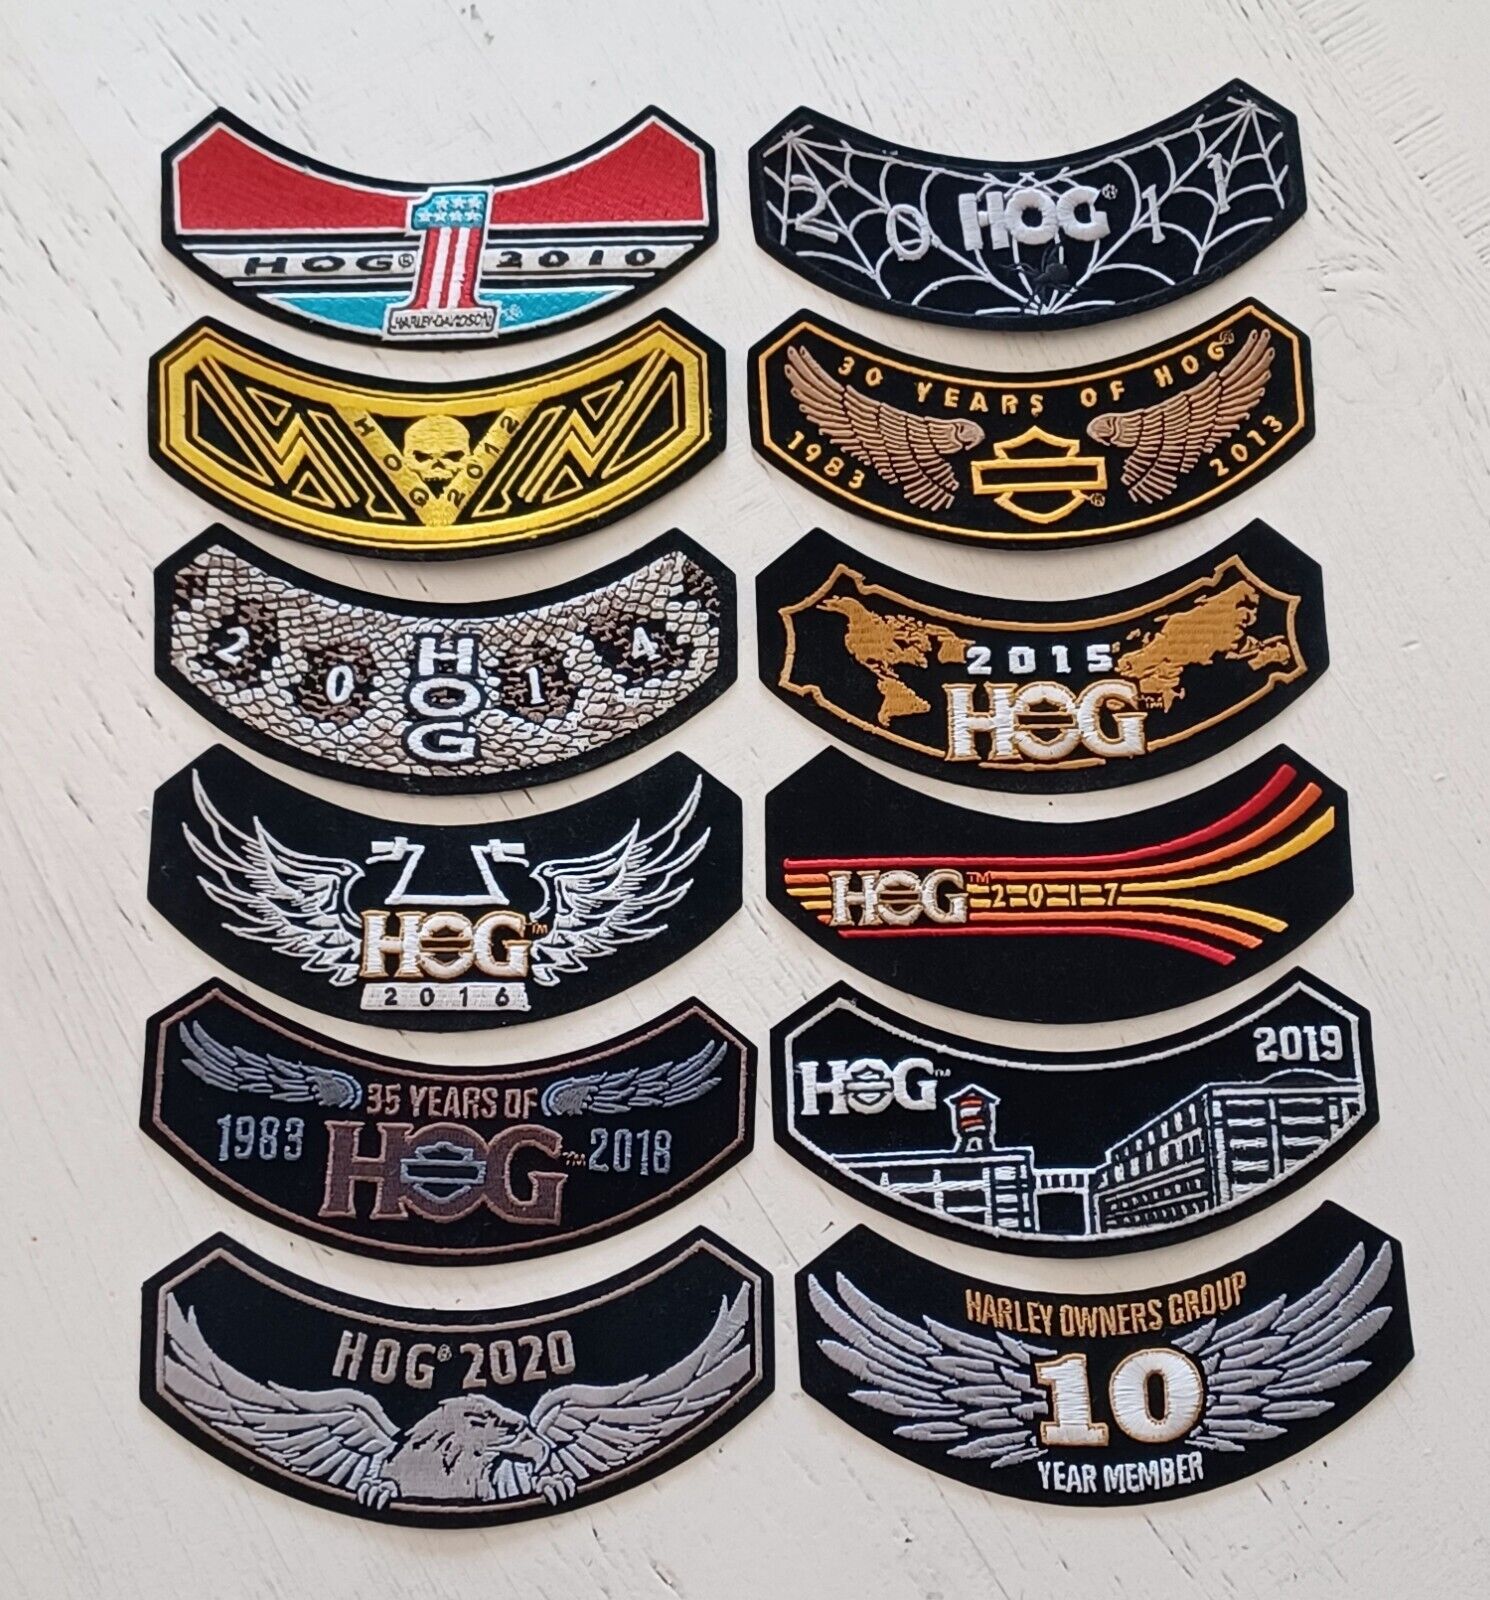 12 Harley Davidson Motorcycles 2010 - 2020 HOG Harley Owners Group Patches